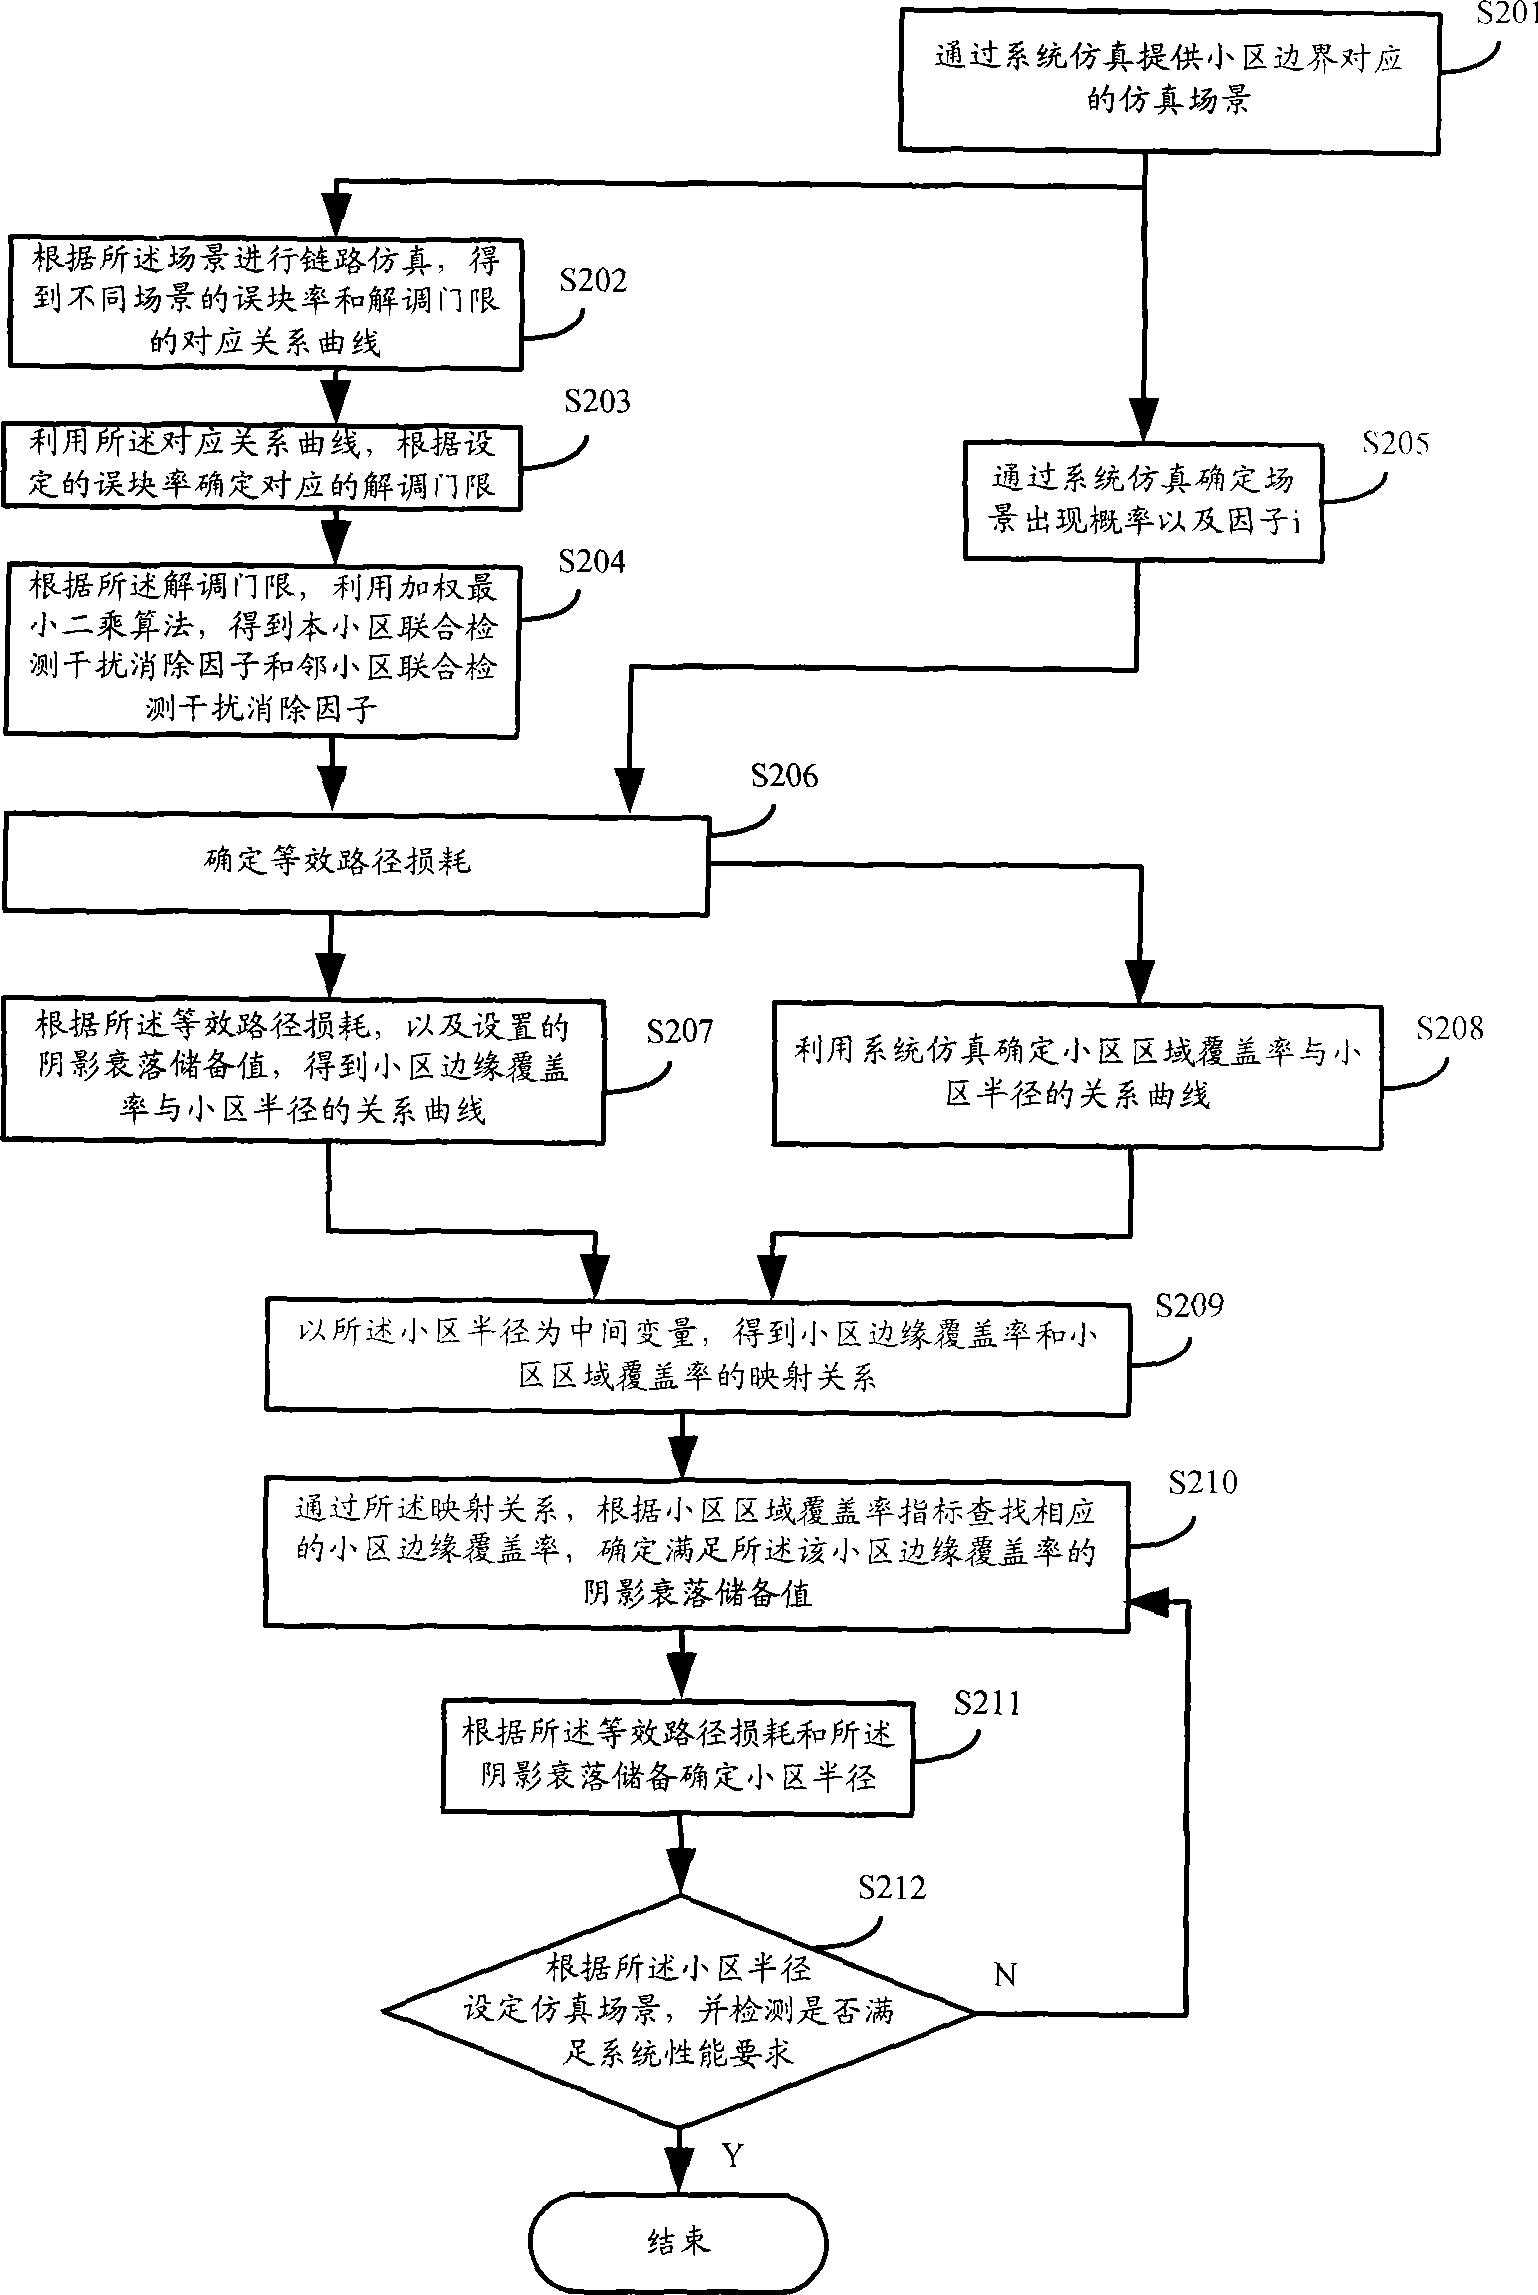 Method and apparatus for confirming cell coverage area through common signal channel